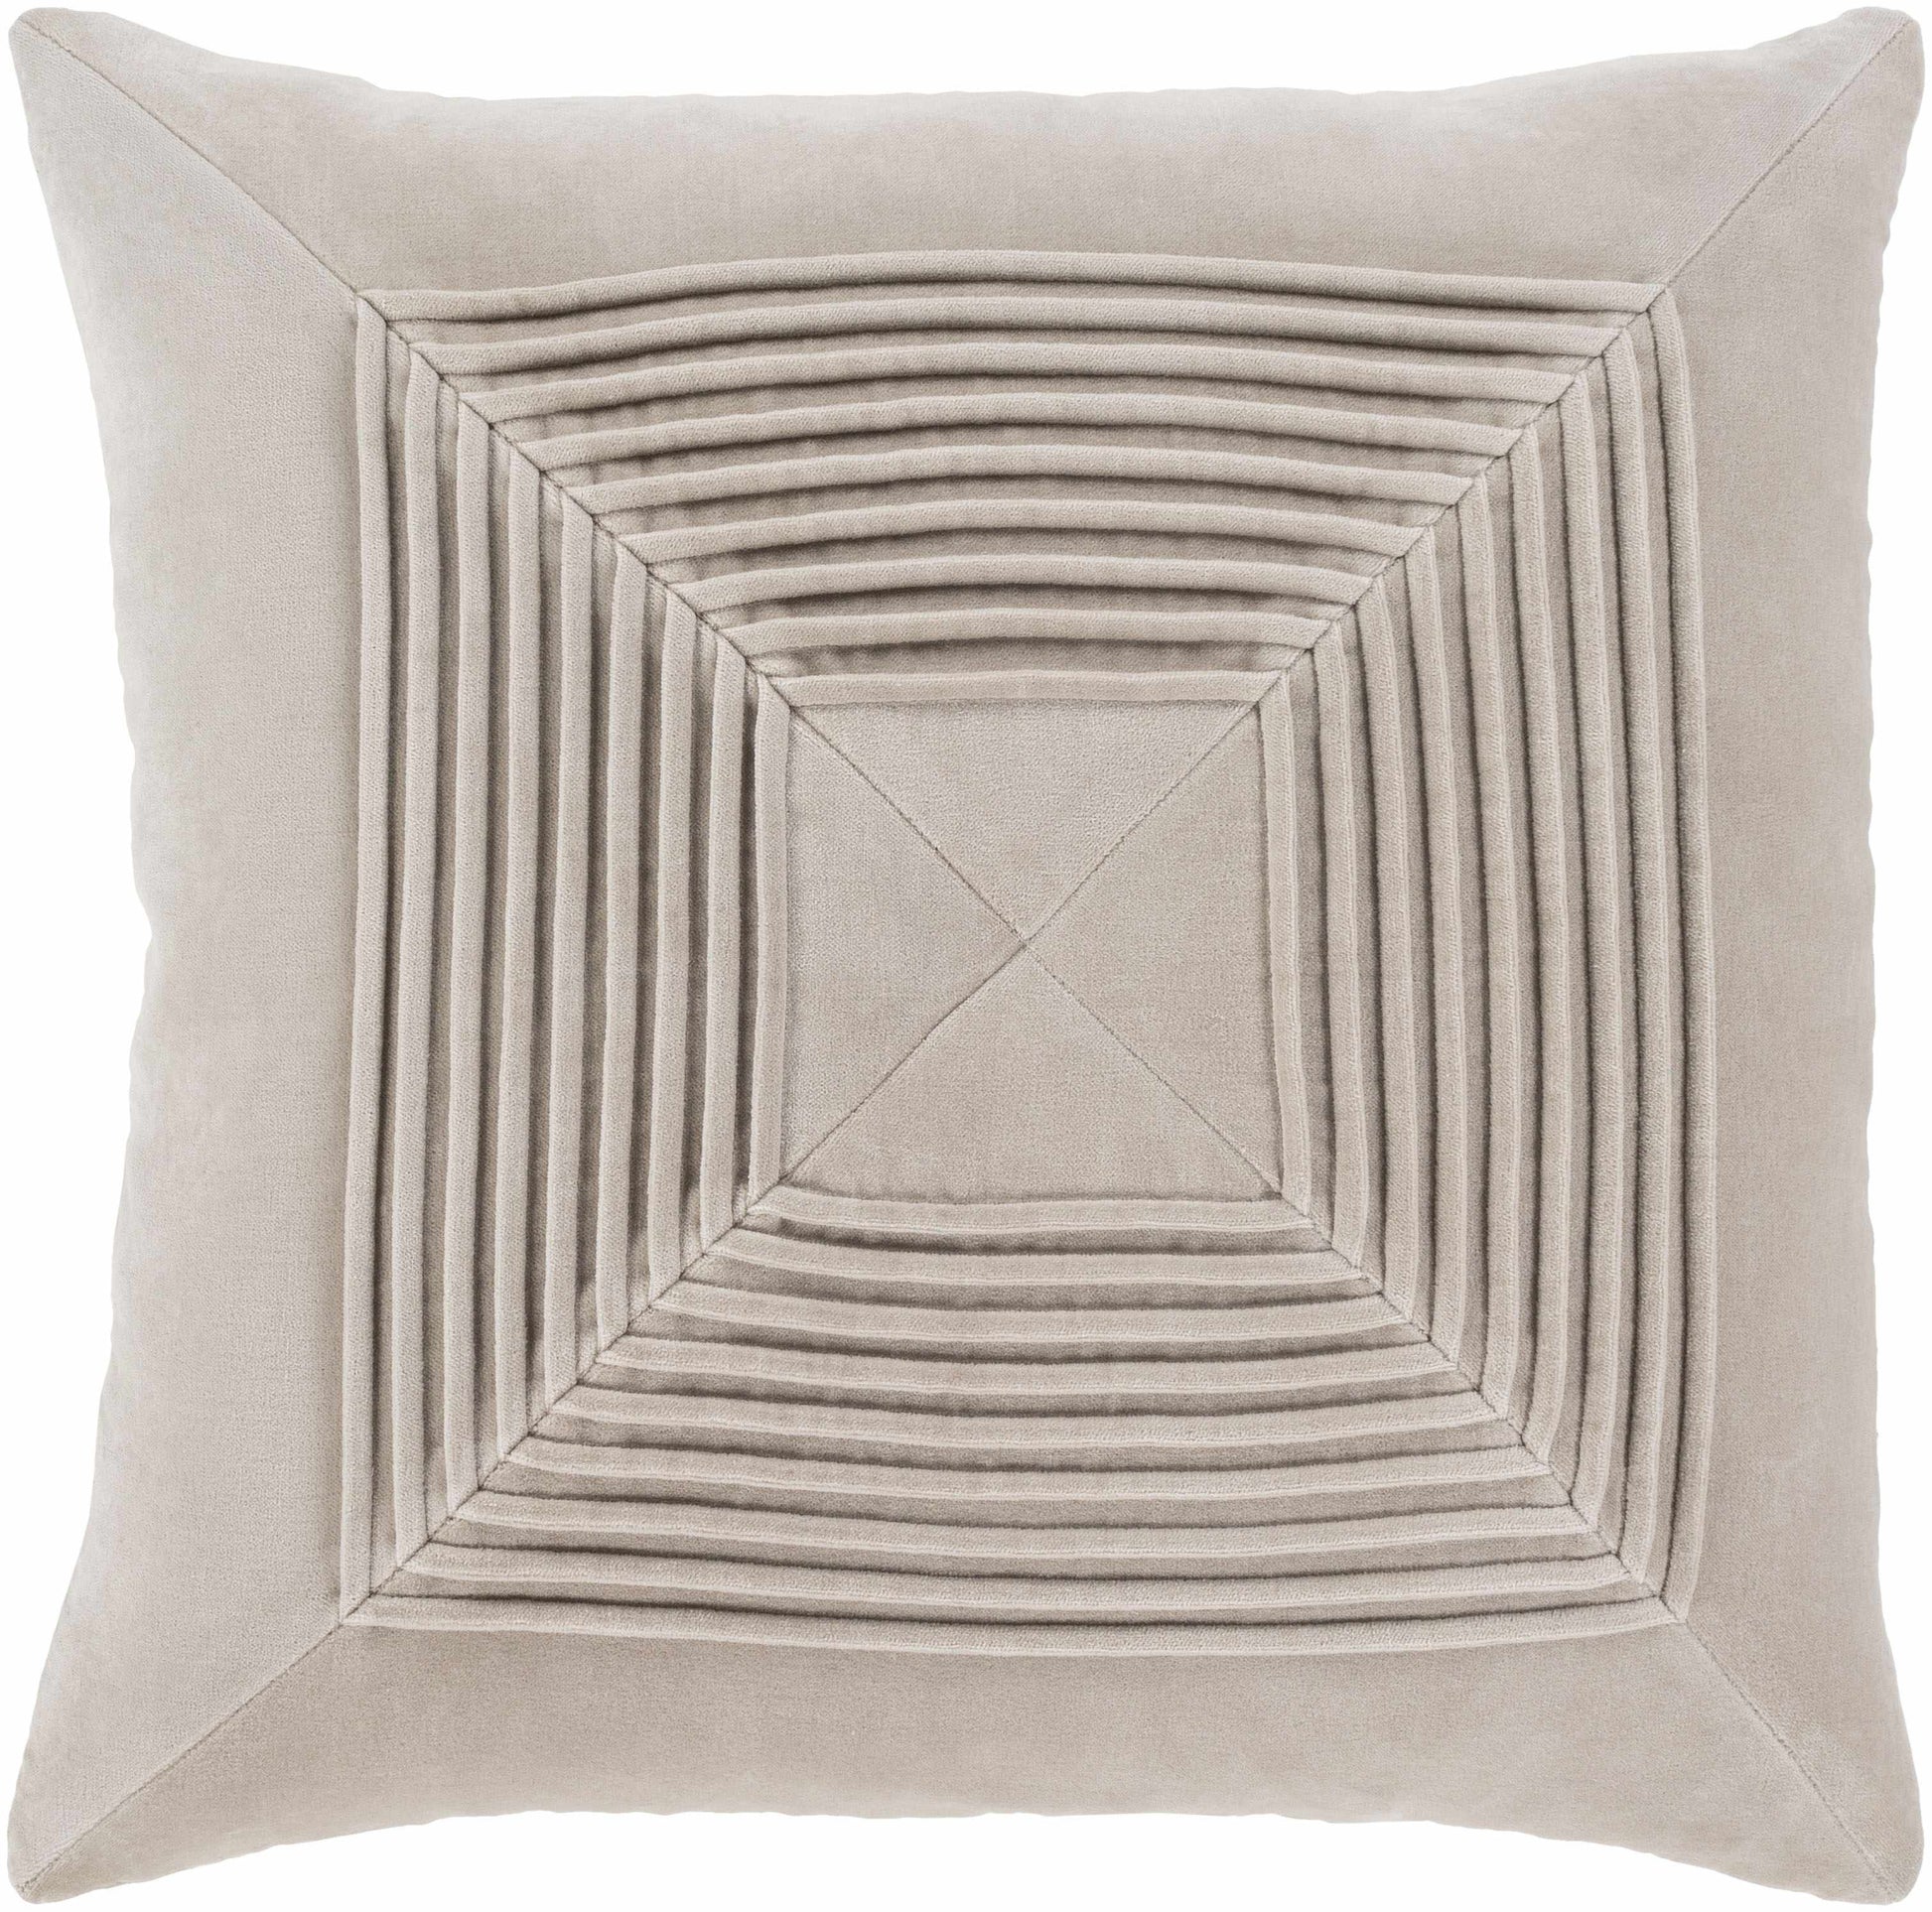 Sion Beige Pillow Cover